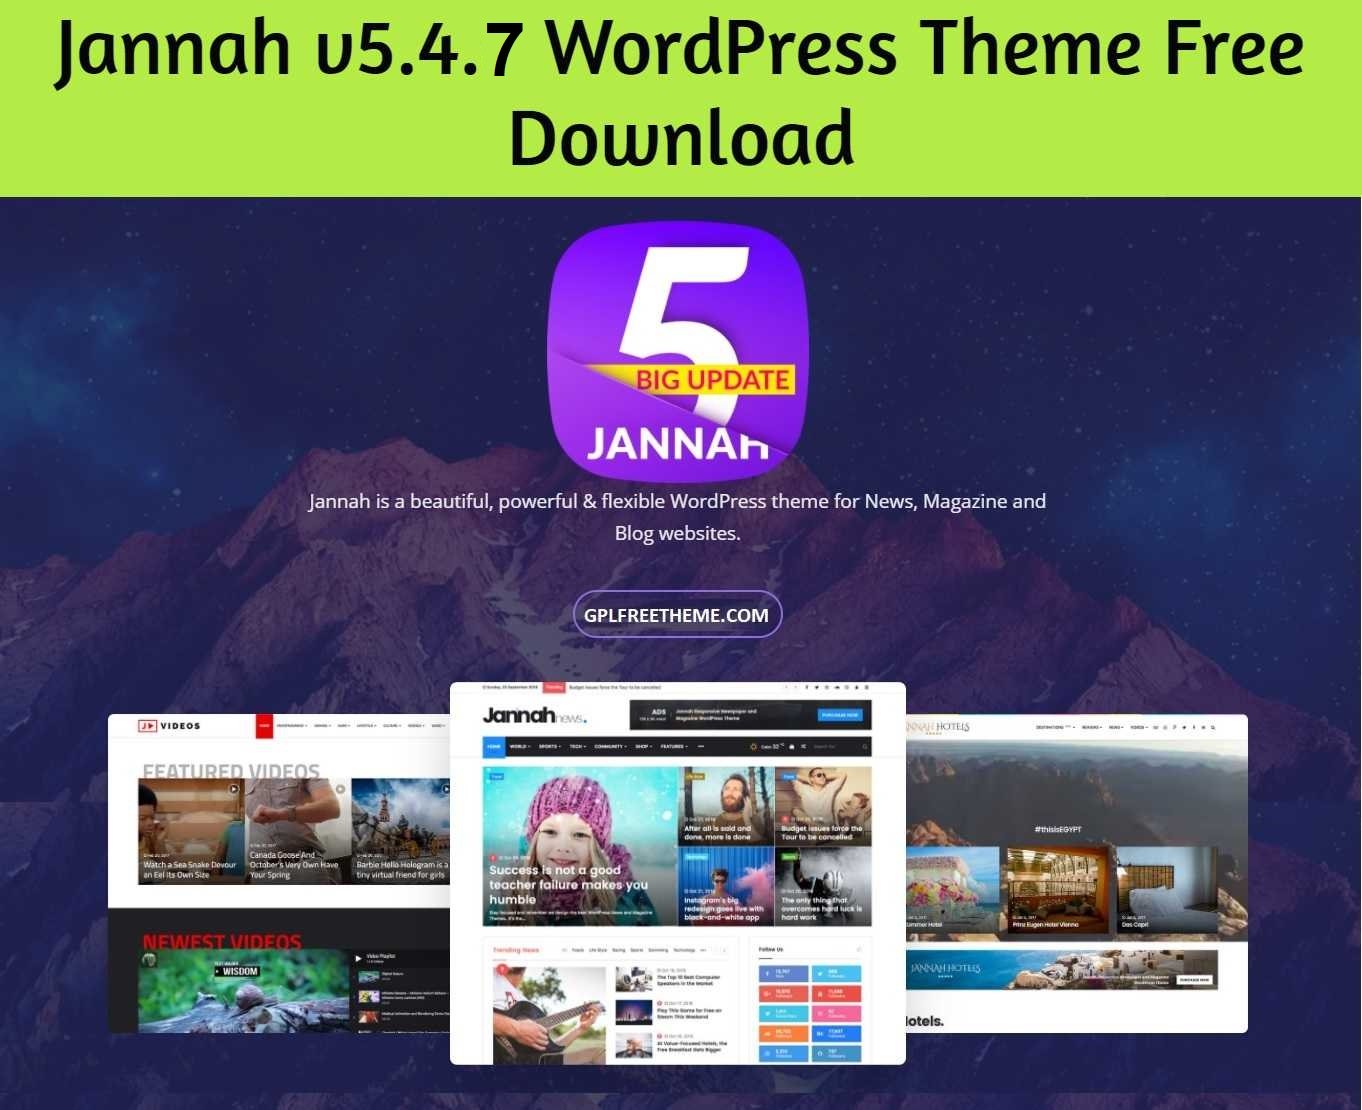 Jannah v5.4.7 WordPress Theme Free Download [Activated]